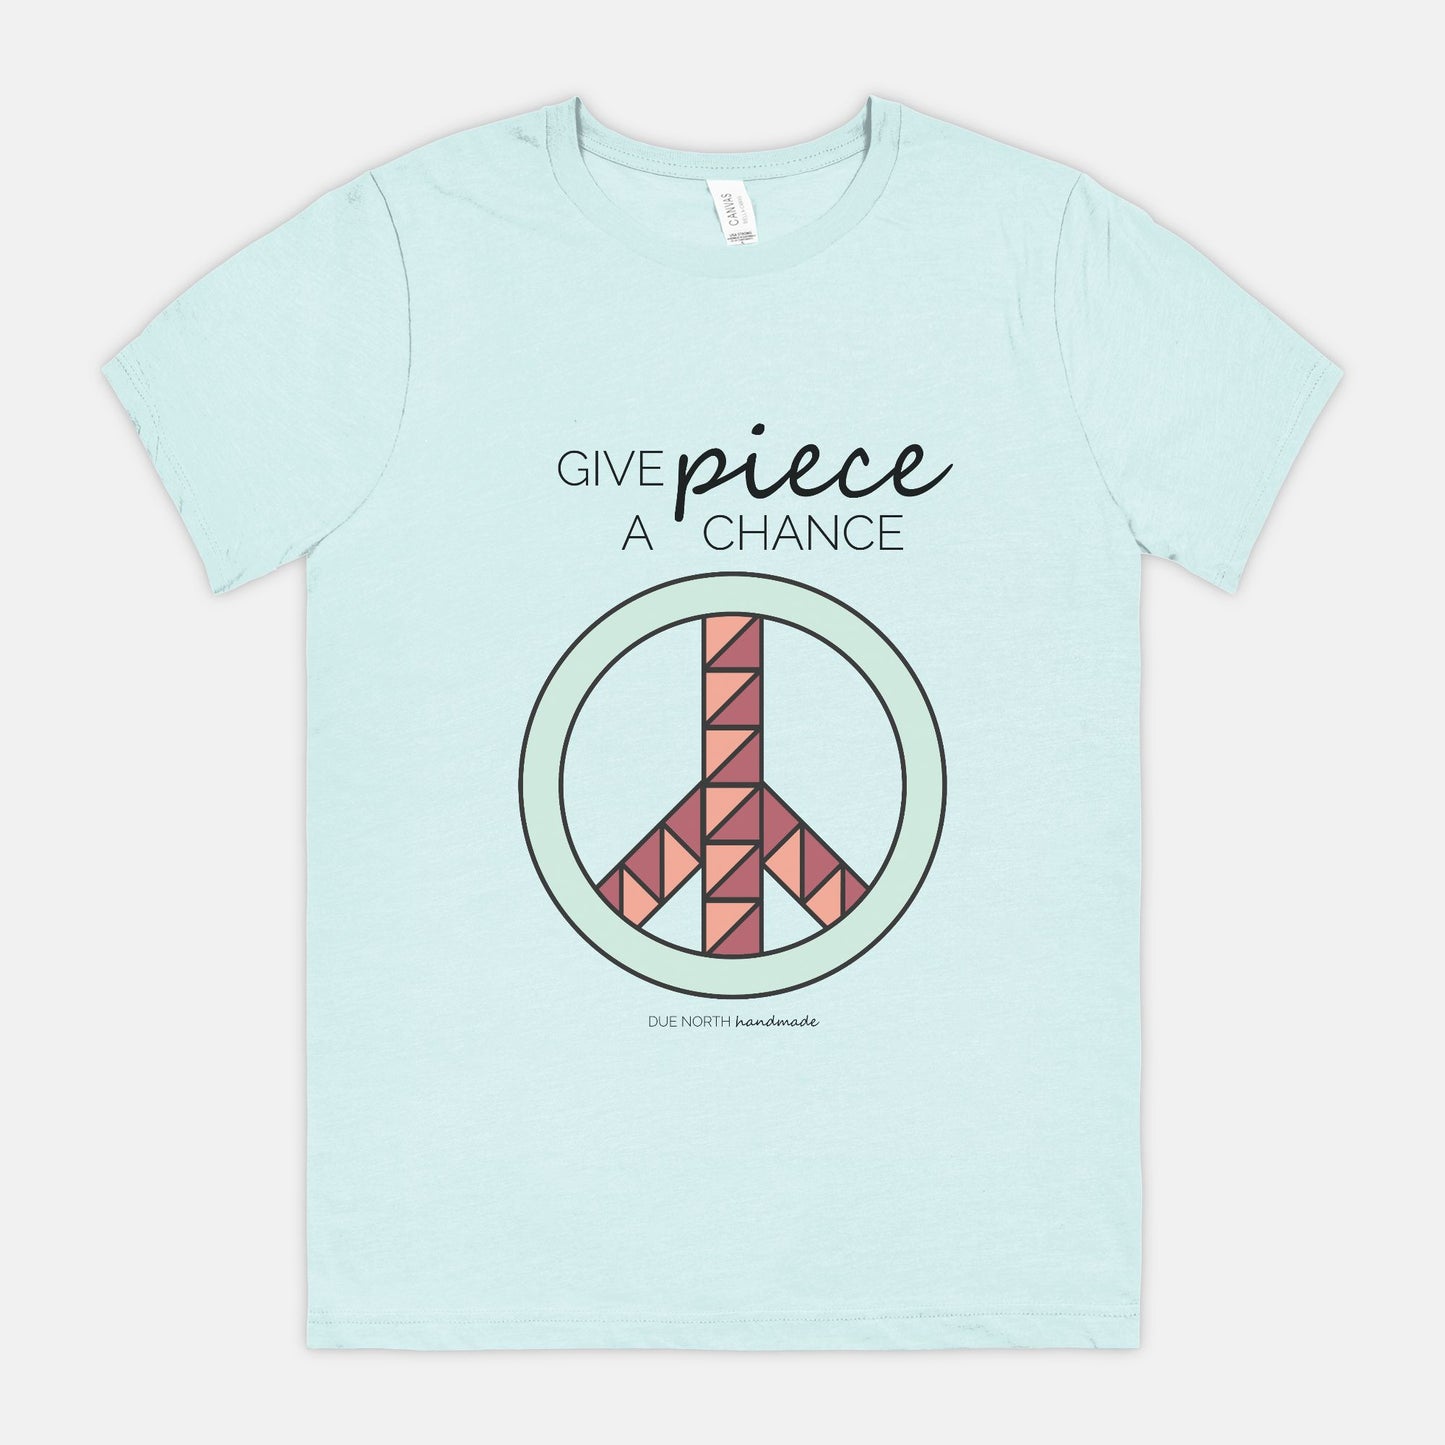 Give Piece a chance unisex tee